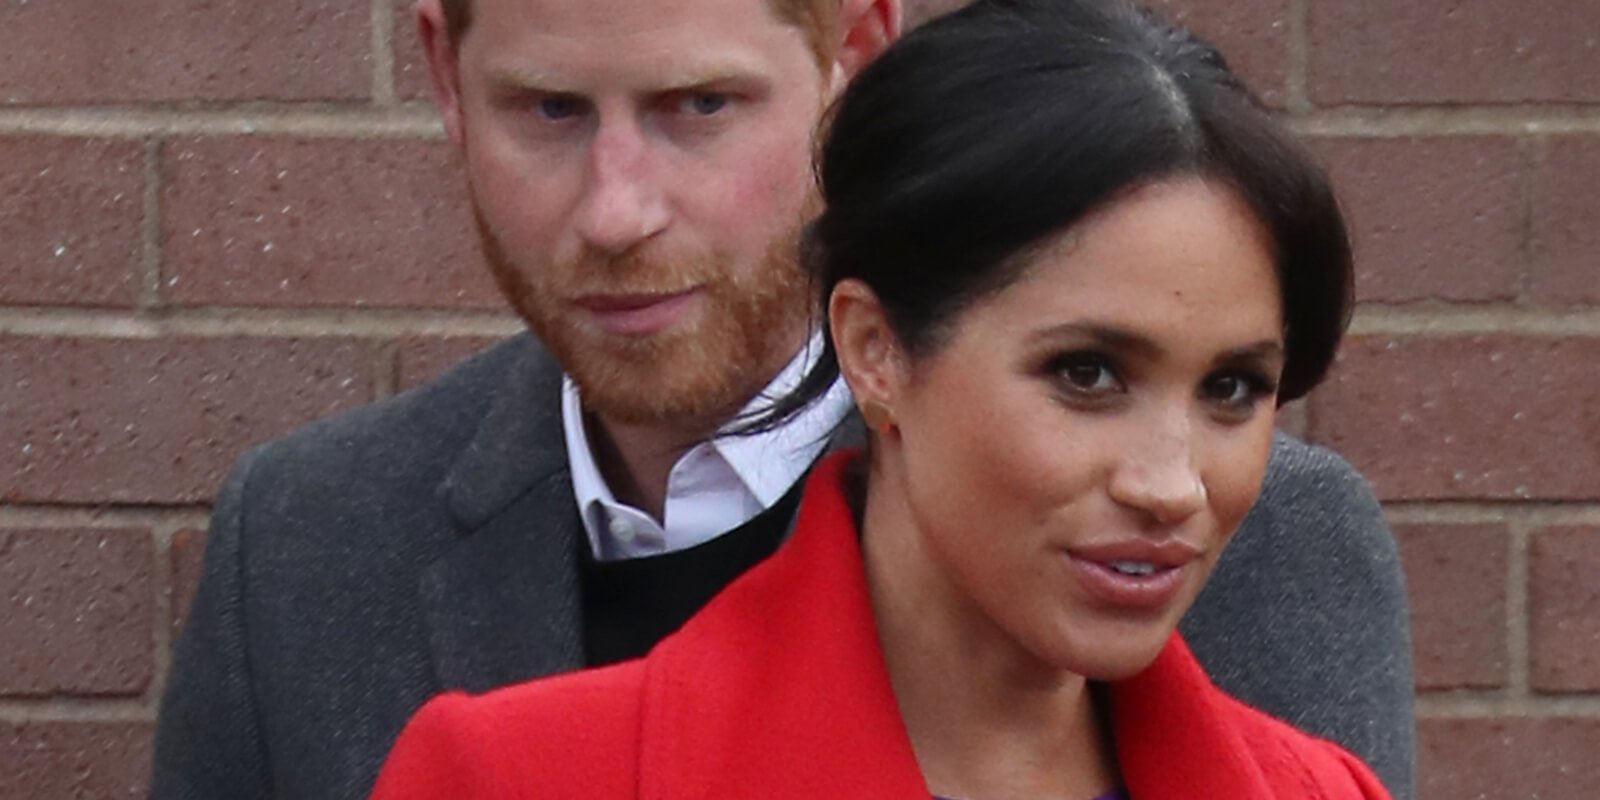 Prince Harry, Duke of Sussex and Meghan, Duchess of Sussex visit 'Tomorrow's Women Wirral' Charity on January 14, 2019 in Birkenhead, United Kingdom.